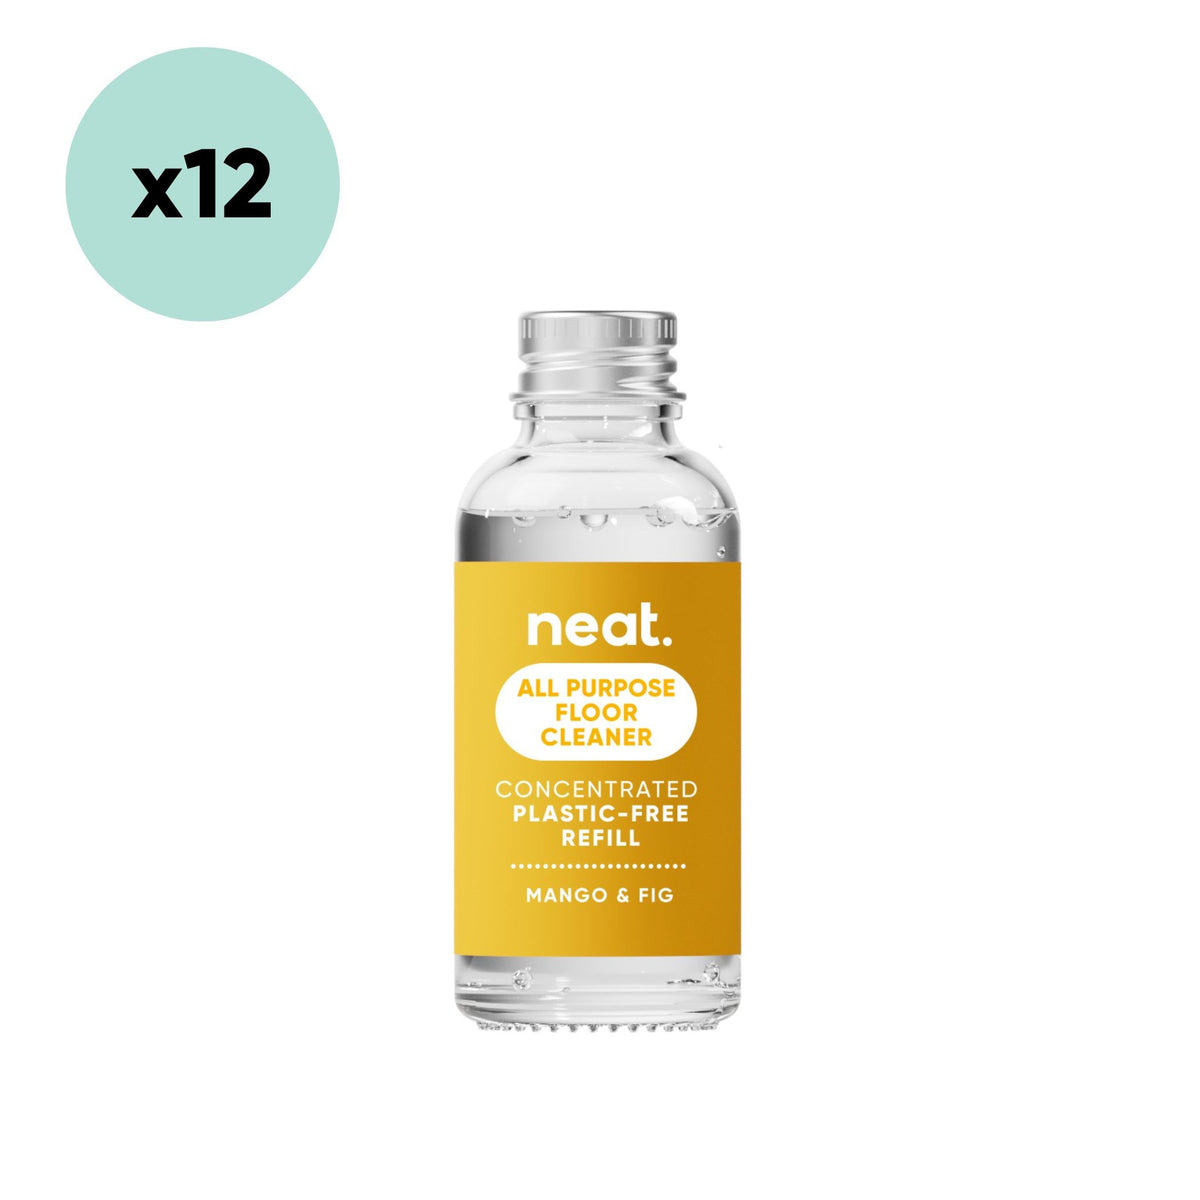 neat. All Purpose Floor Cleaner Refill - Mango & Fig (12 pack)